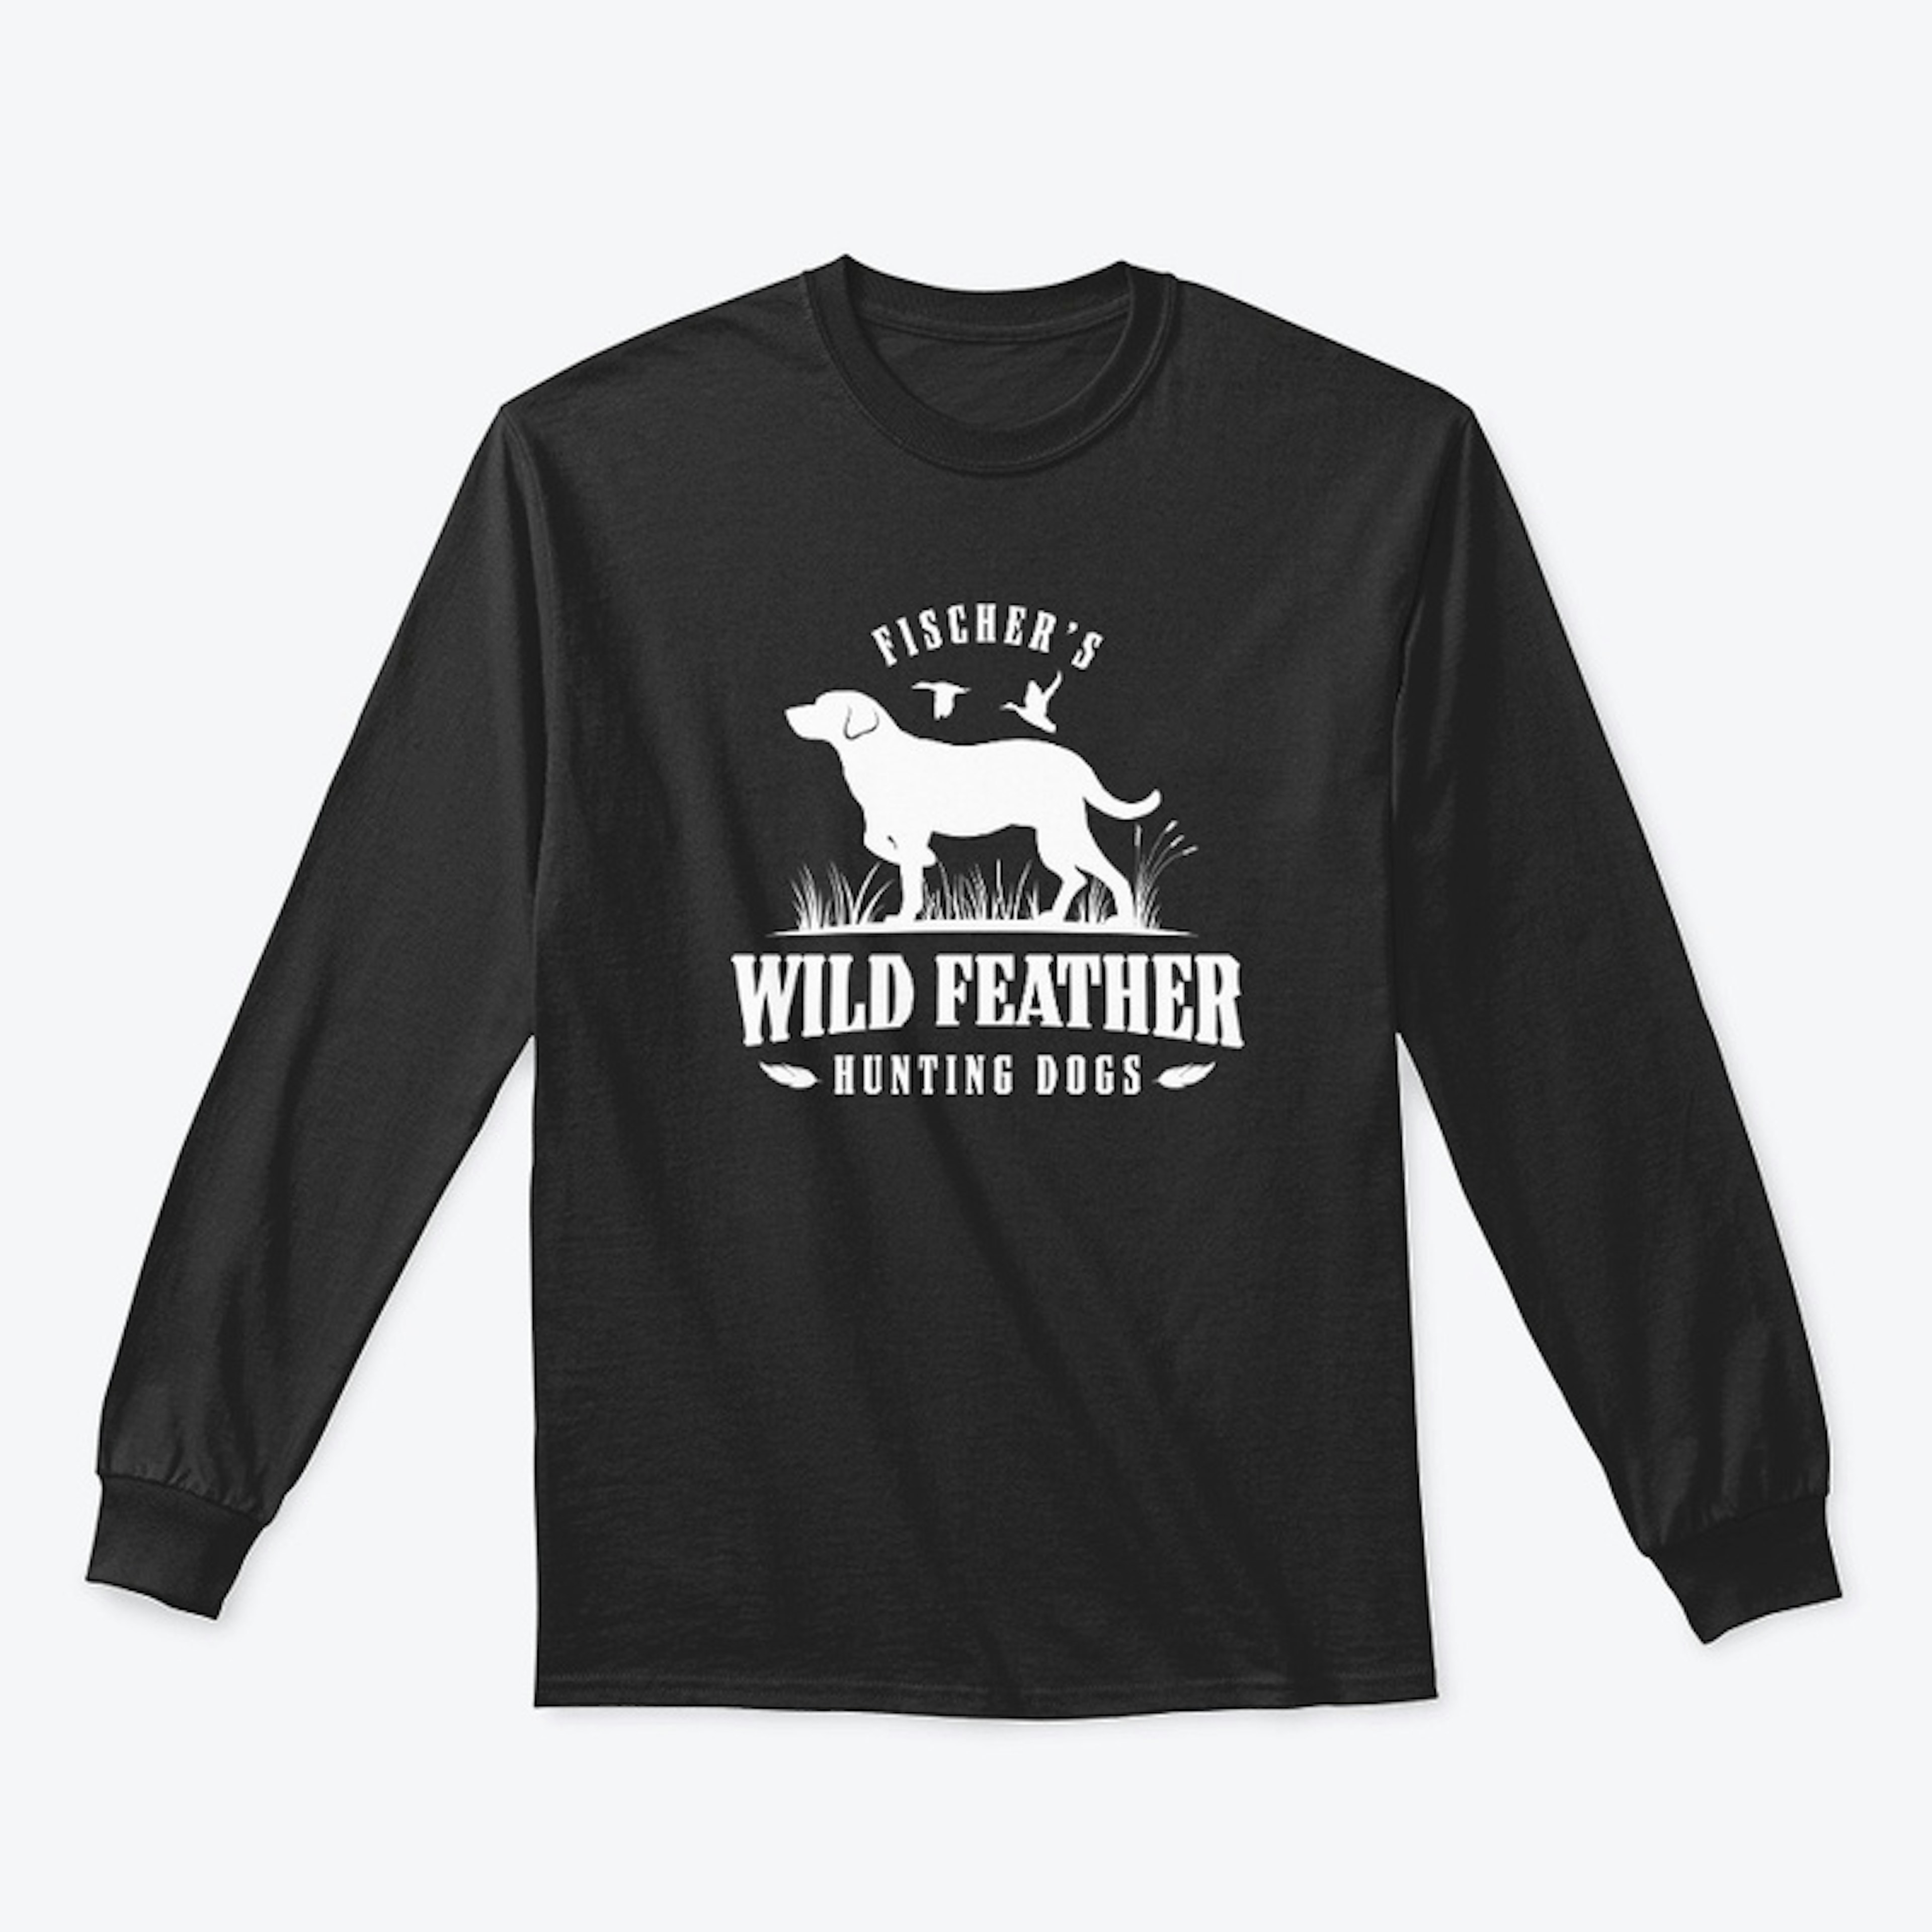 Wild Feather Hunting Dogs gear